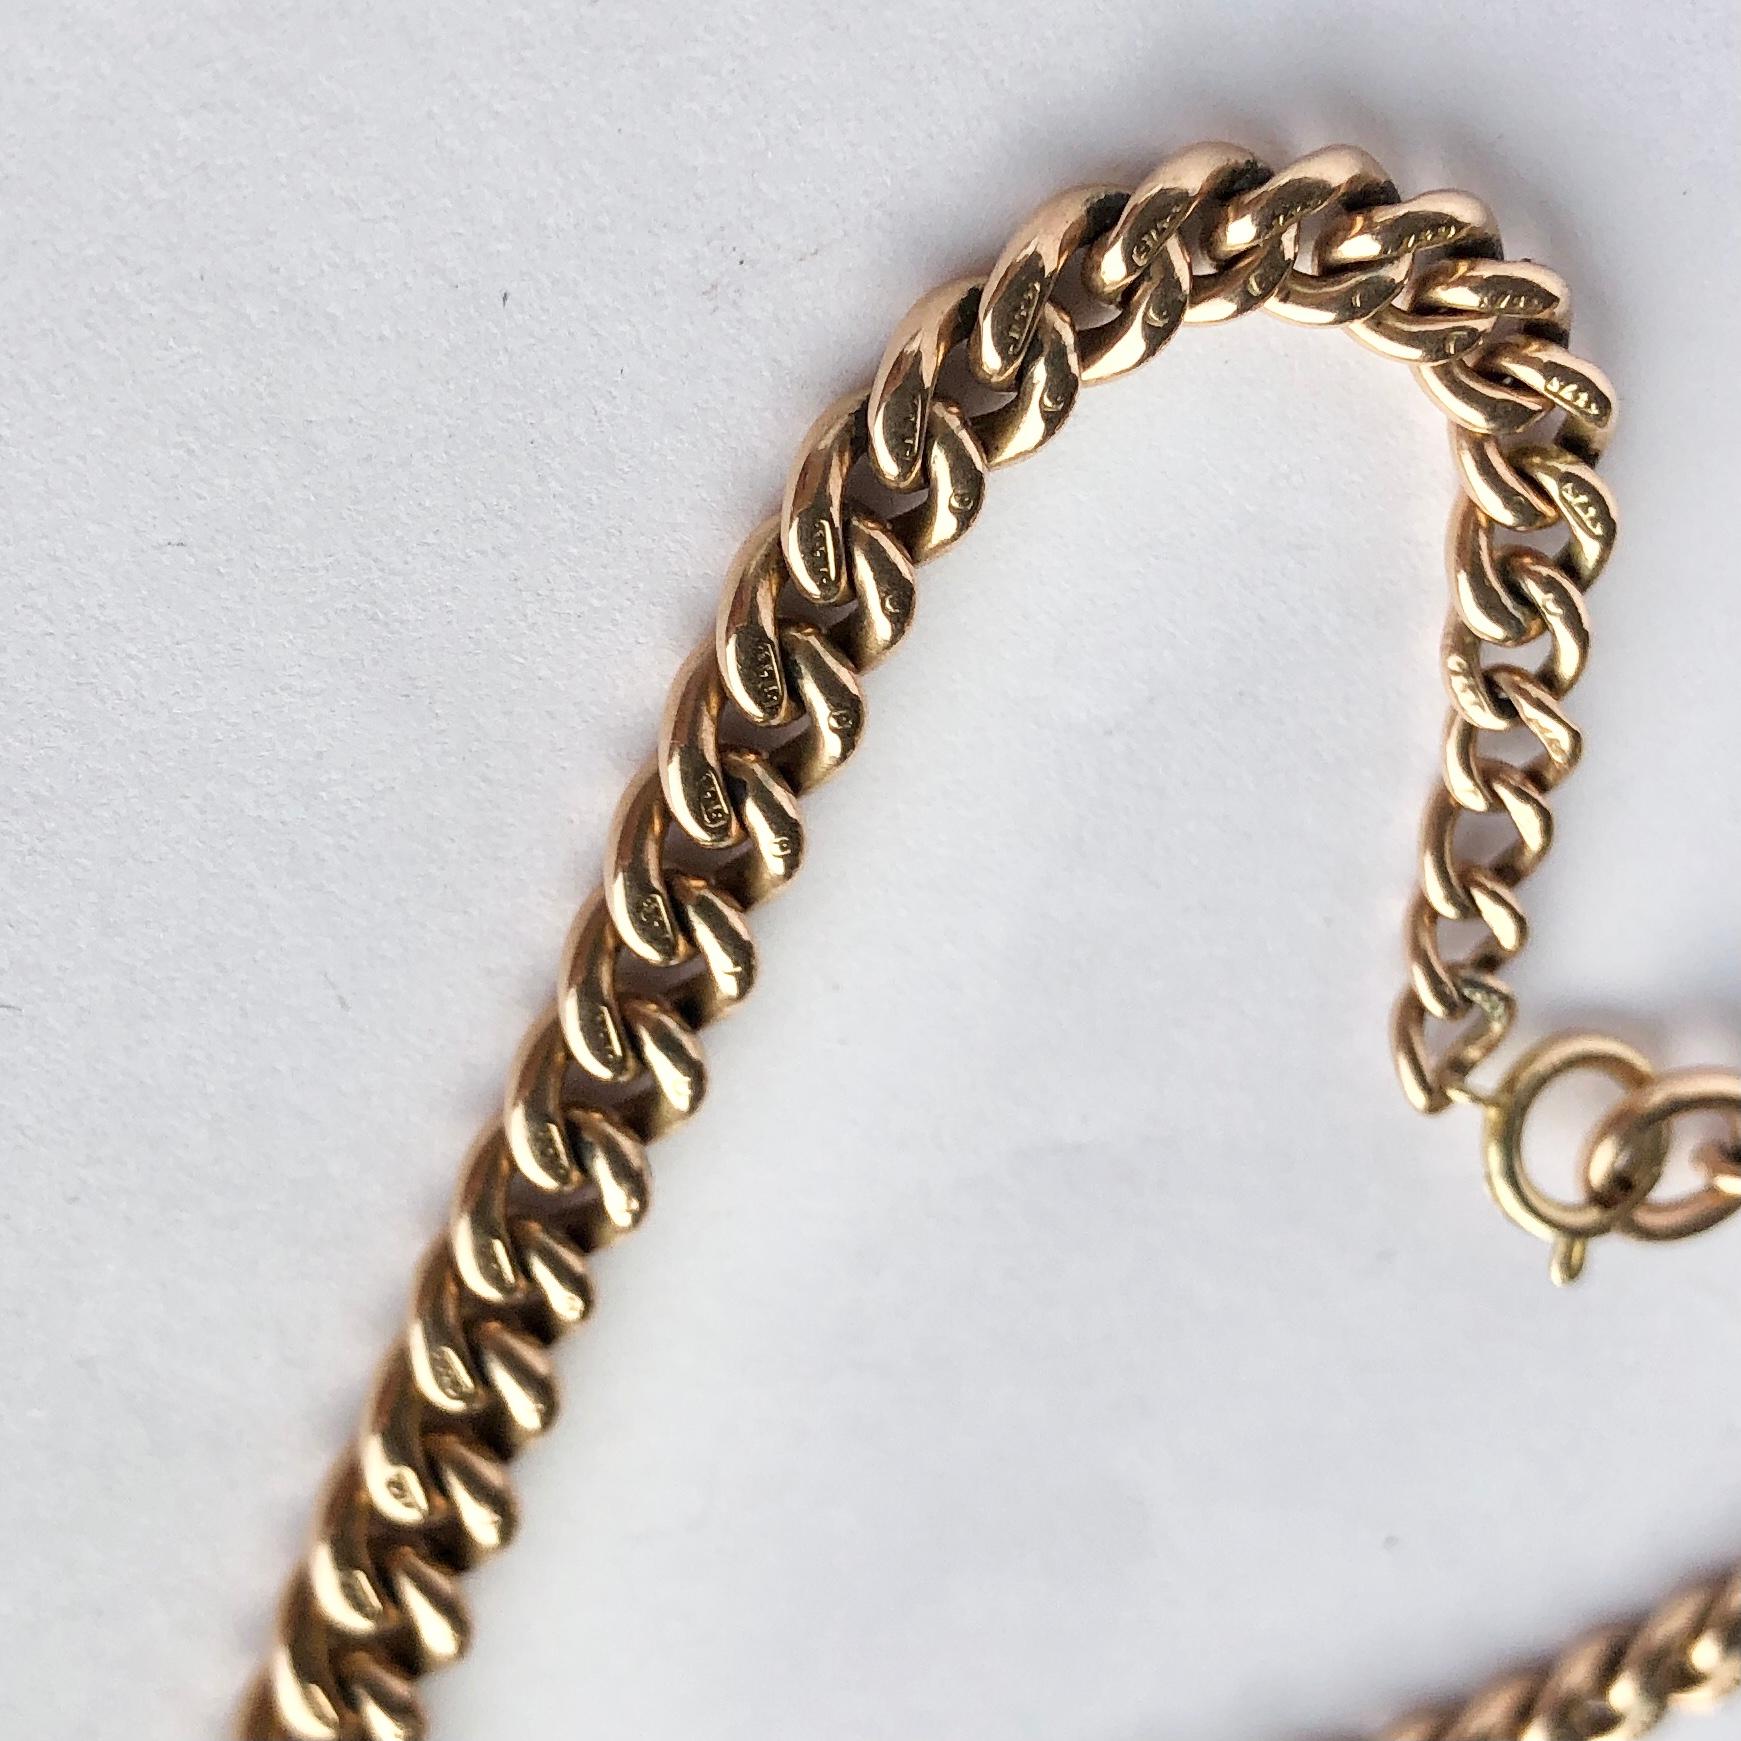 This curb chain bracelet is wider at the centre and slimmer towards the clasp and modelled in glossy 9ct rose gold. The bracelet is fastened by simple bolt clip and loop. Each link is hallmarked. 

Length: 23.5cm
Widest Point: 7mm
Slimmest Point: